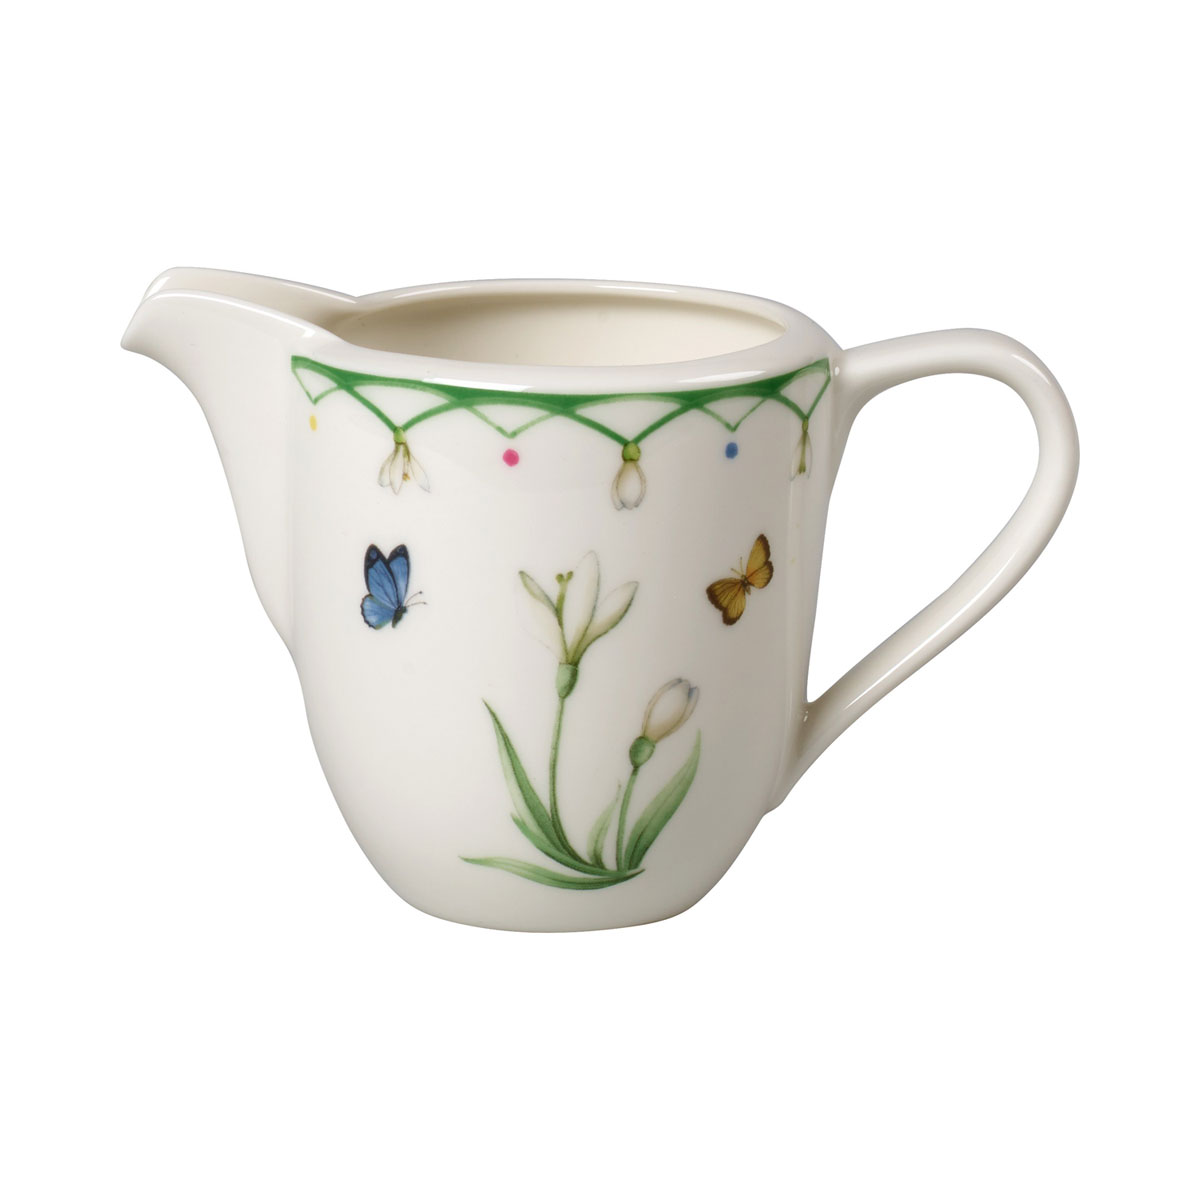 Villeroy and Boch Colourful Spring Creamer